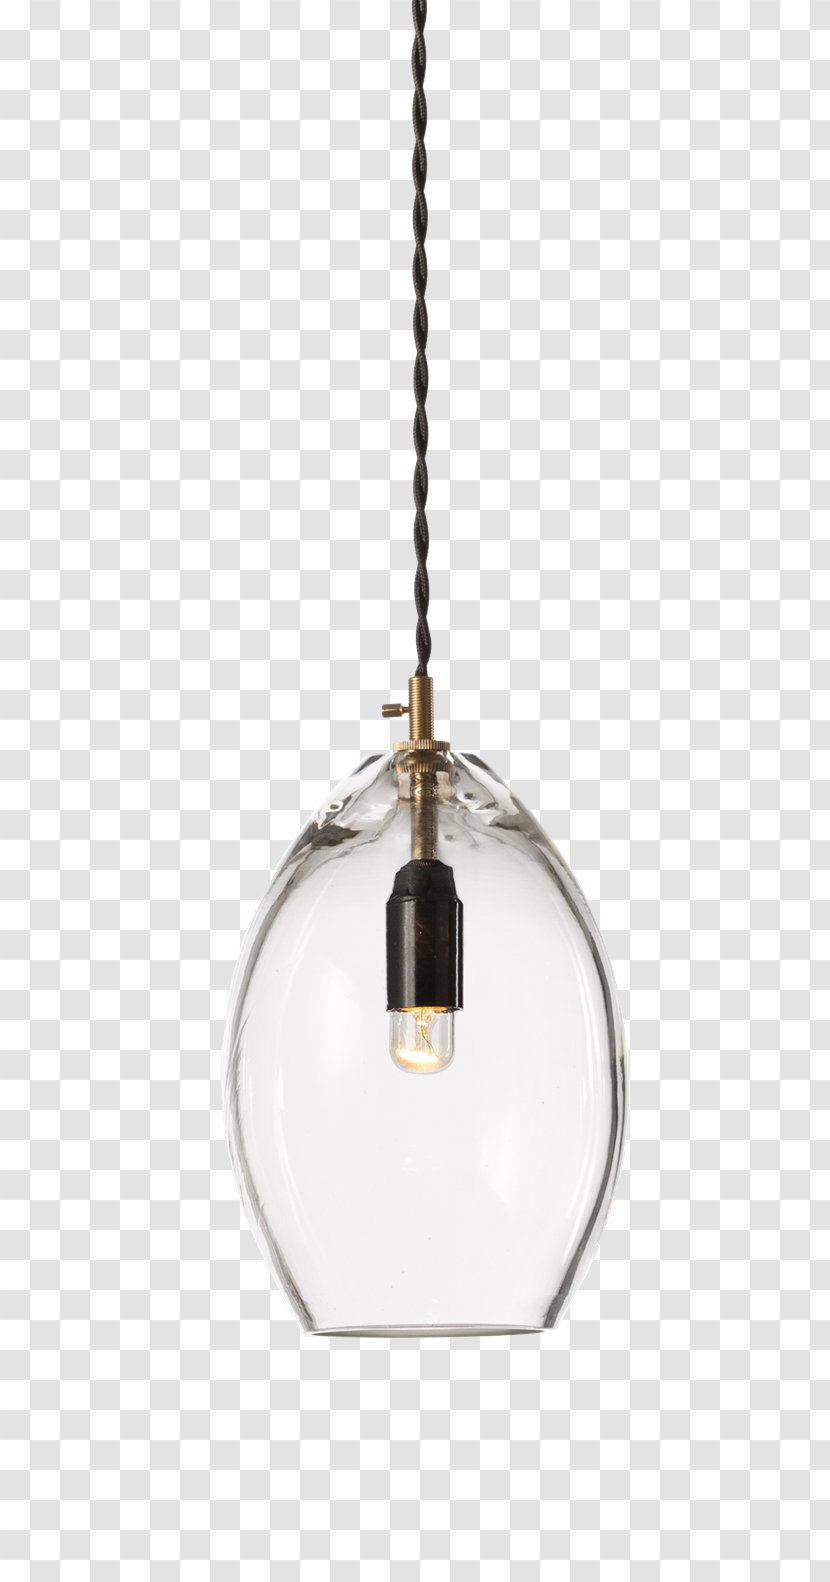 Northern Lighting Glass Lamp - Ceiling Transparent PNG